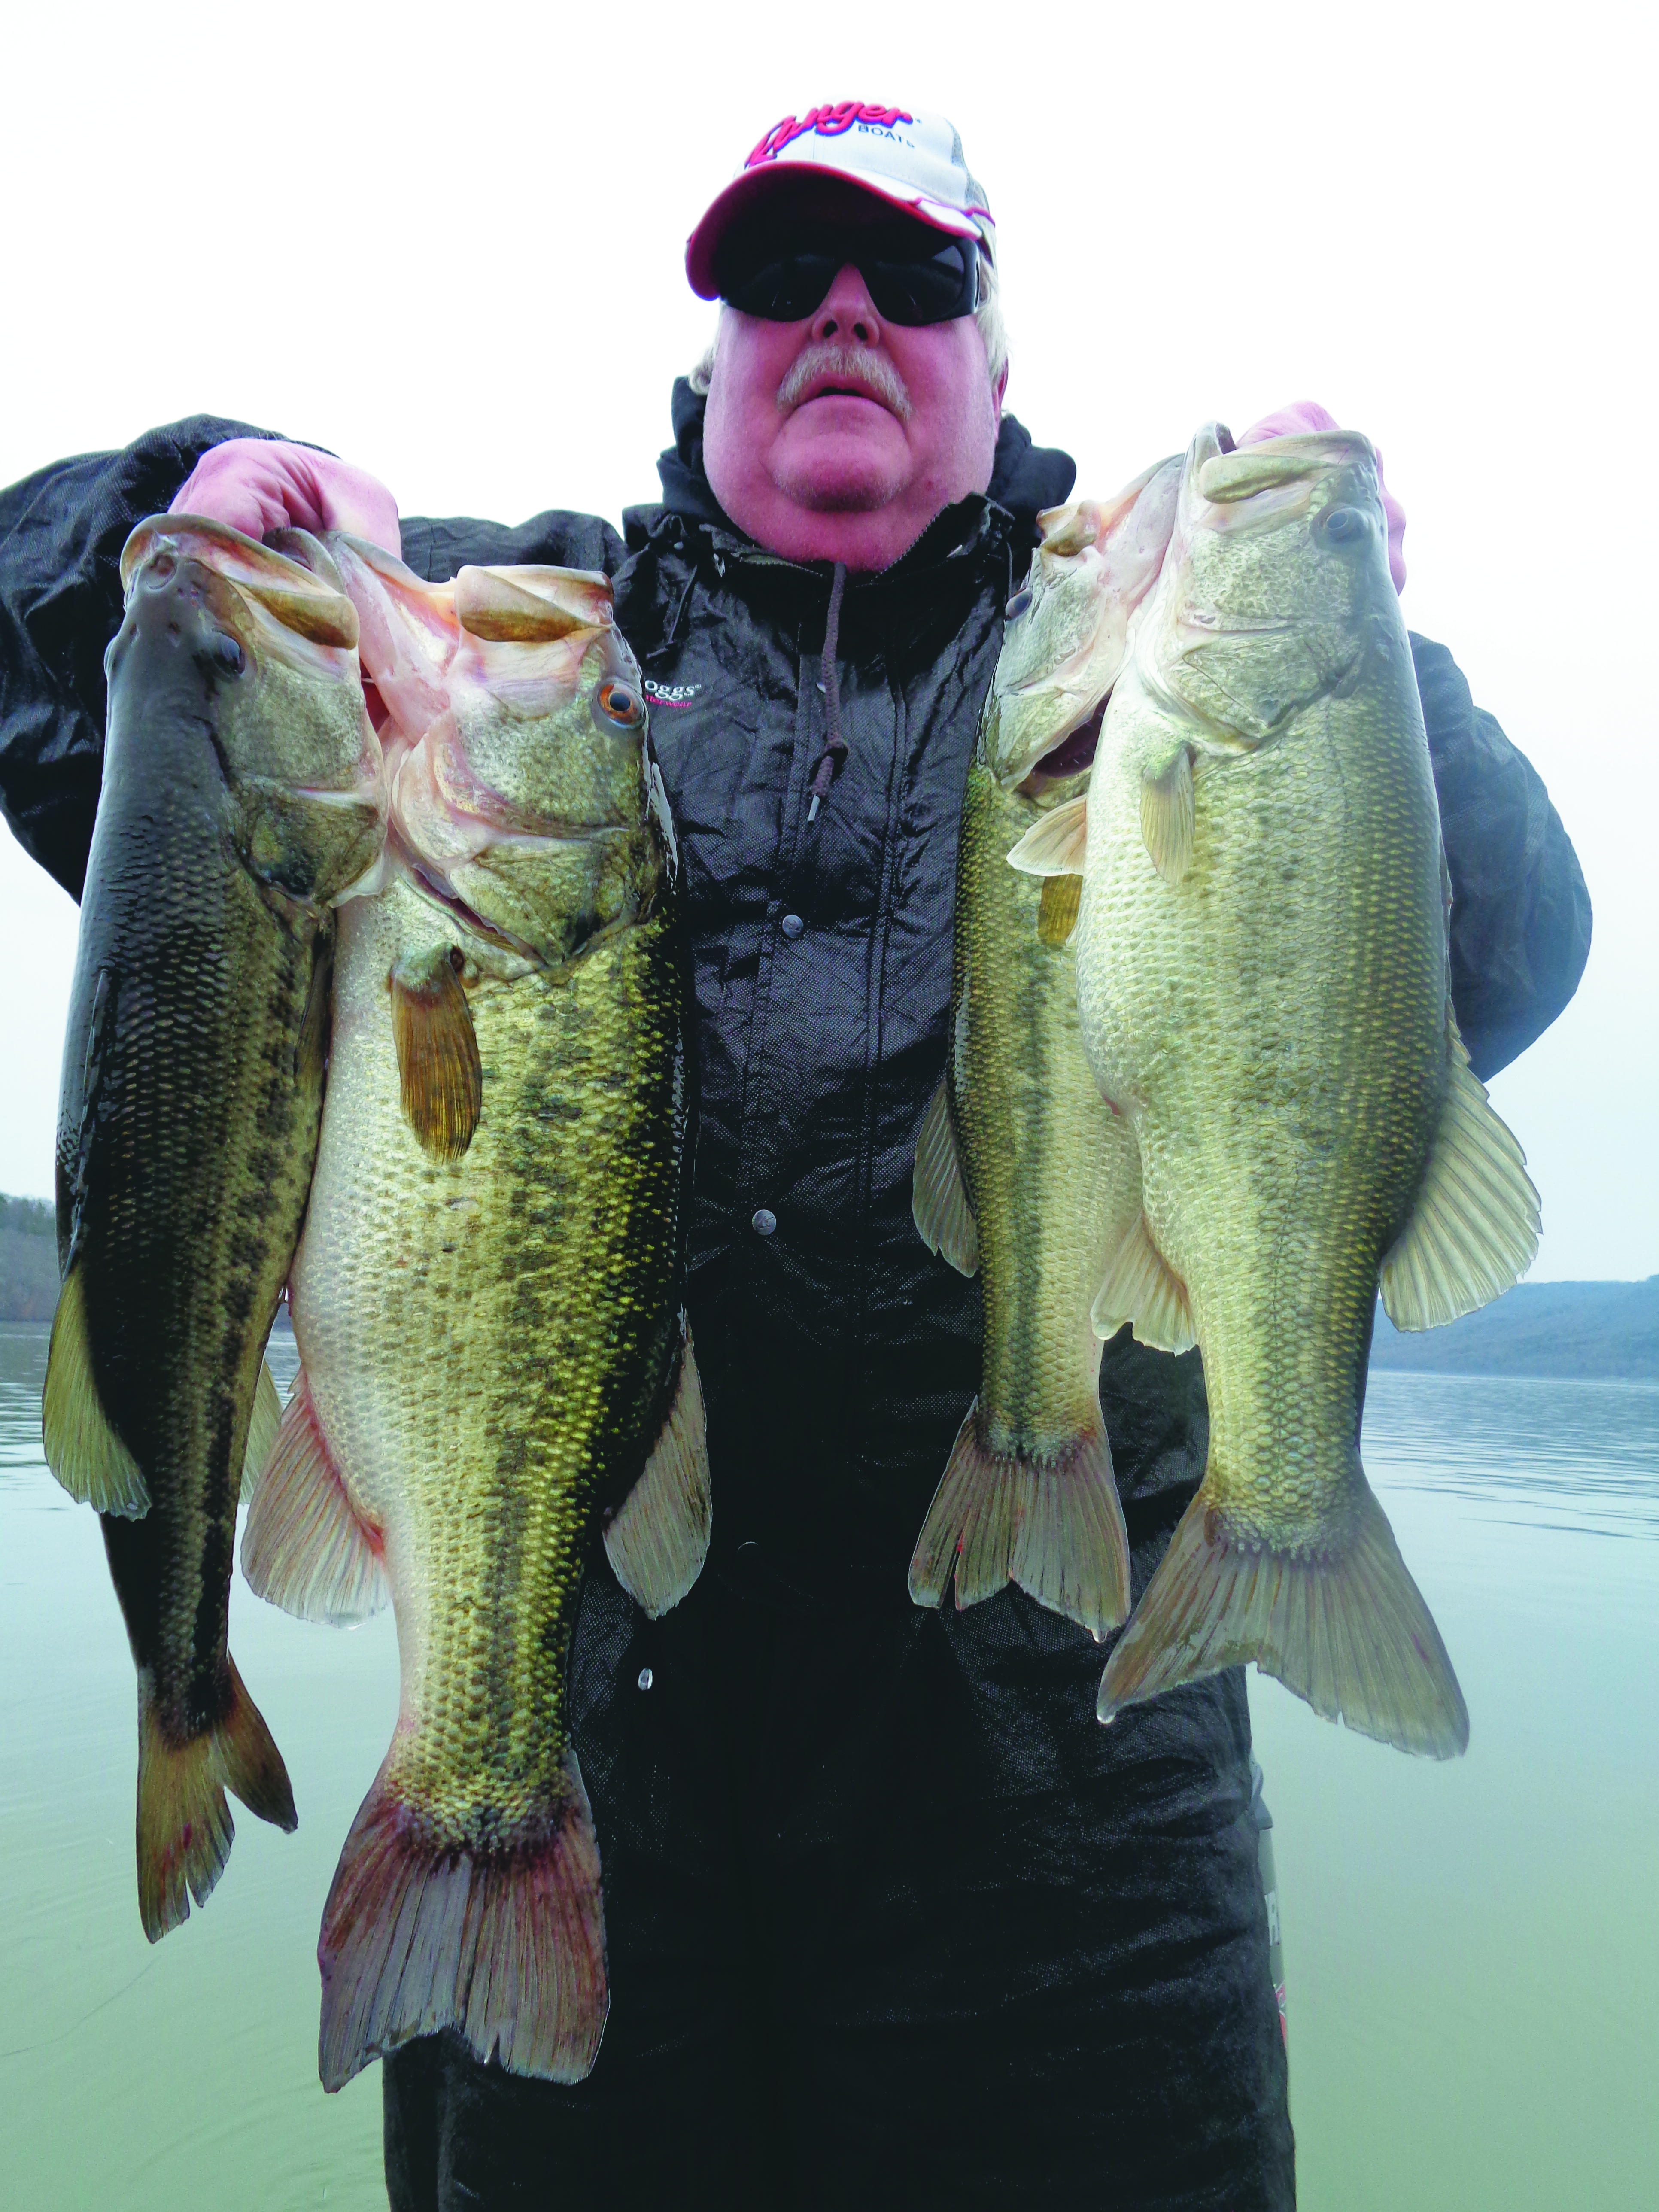 Again, please use extreme caution when winter bass fishing.